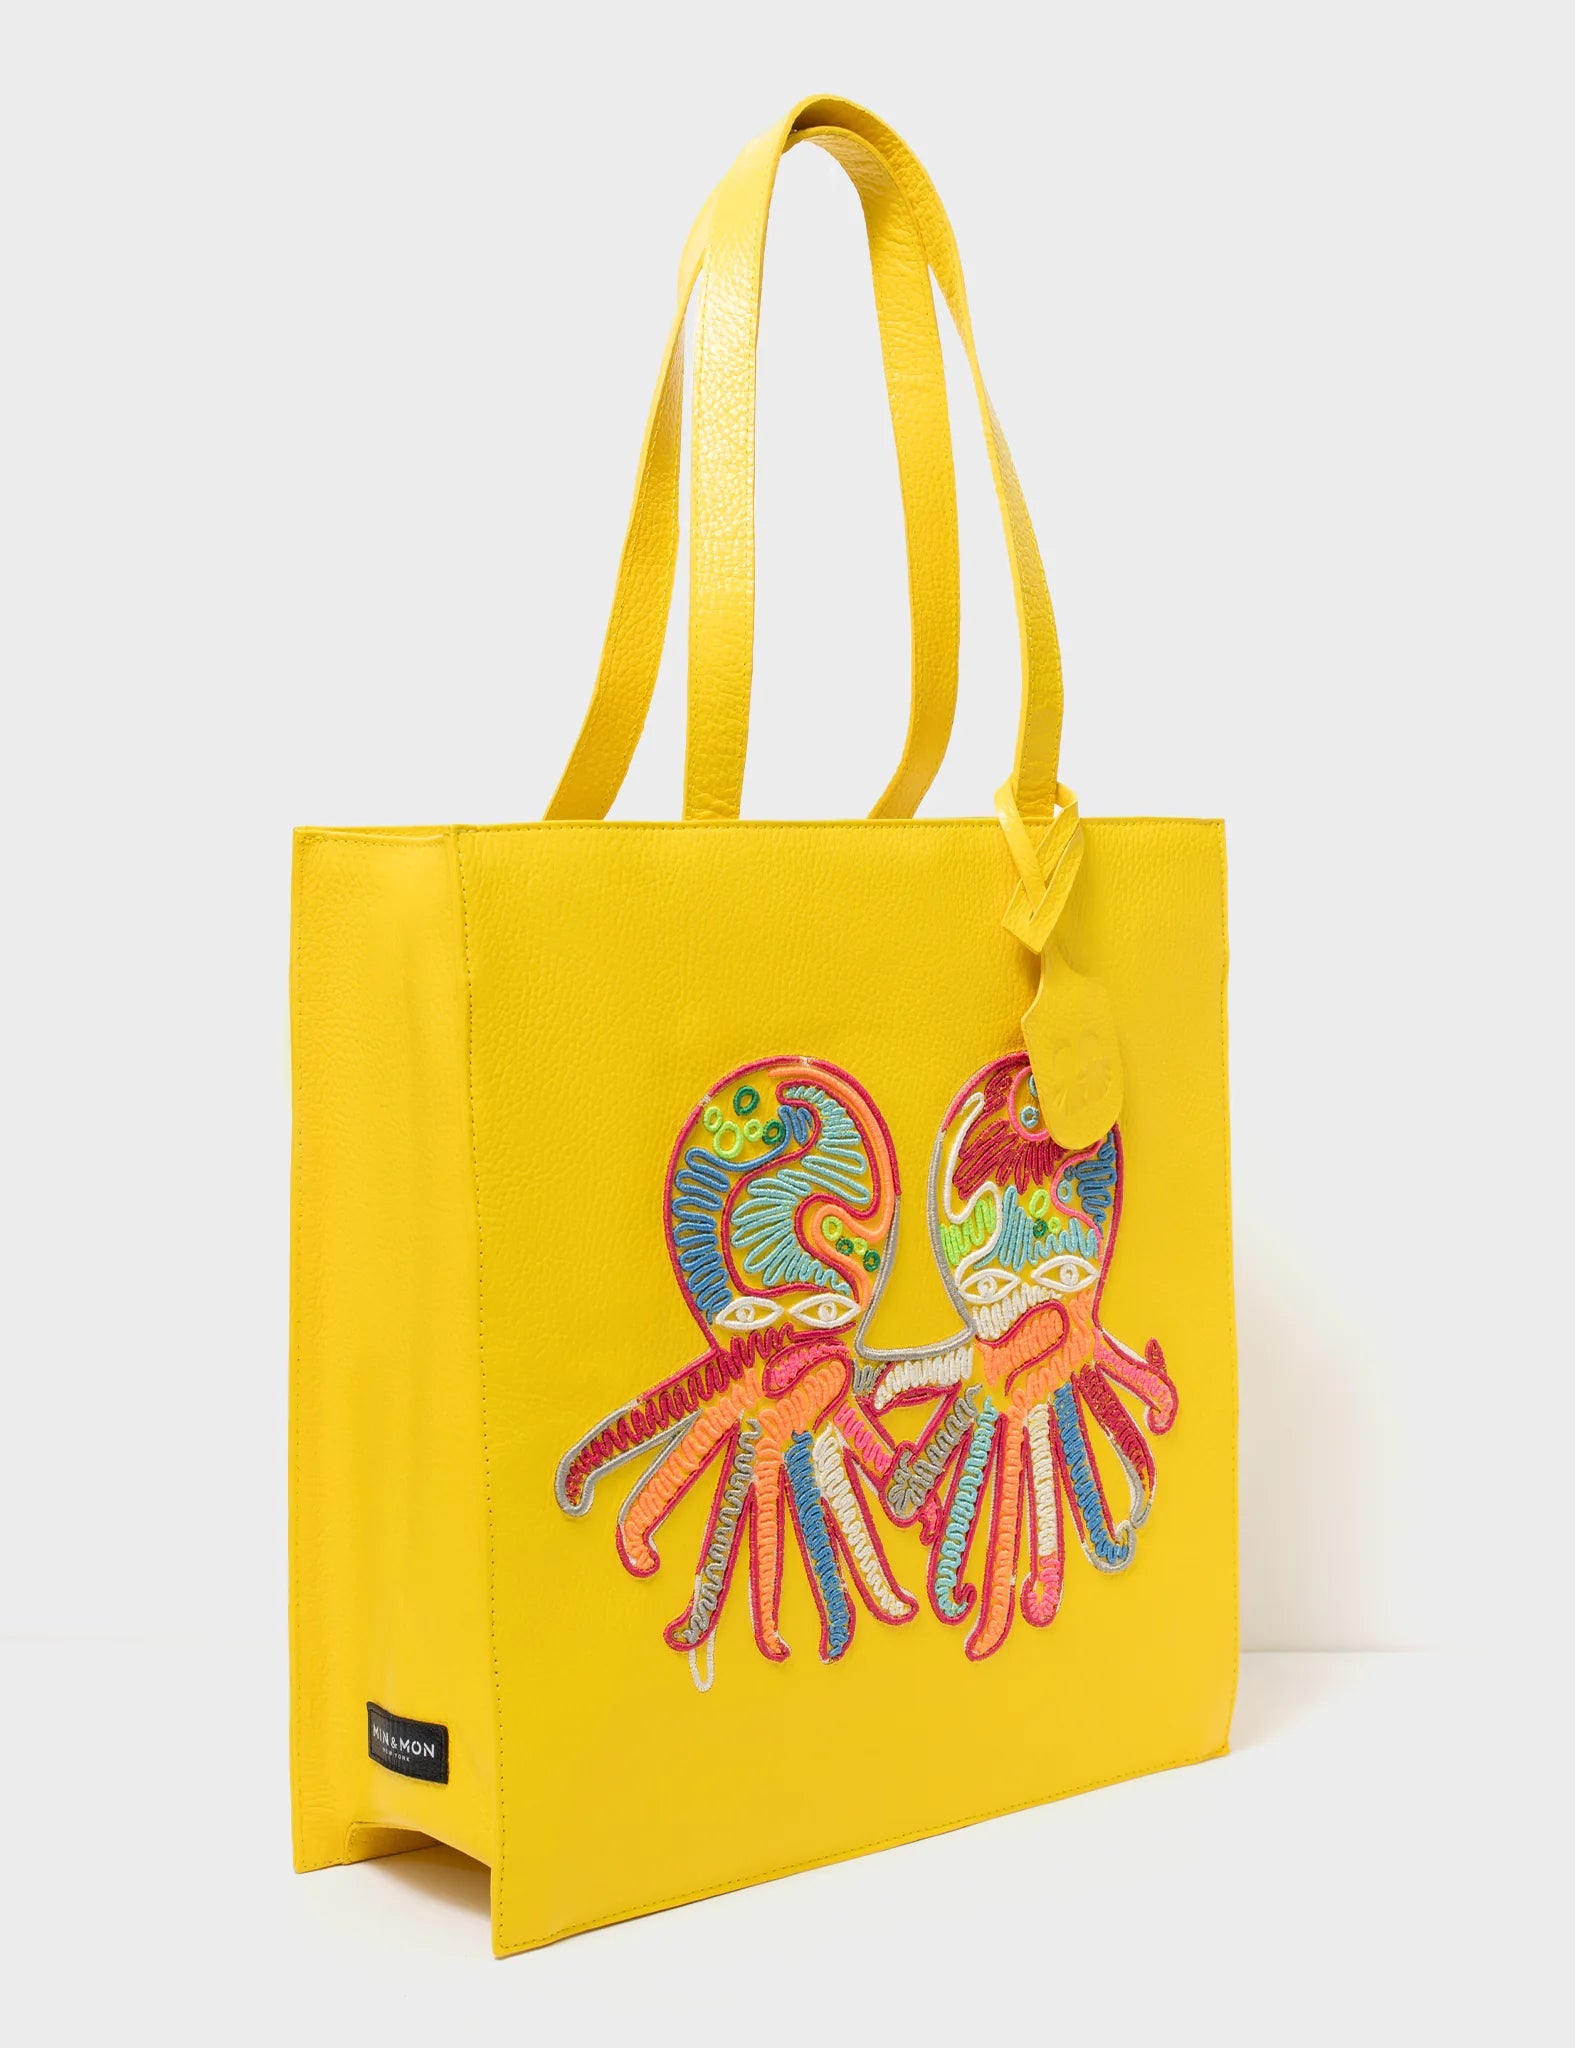 Yellow Leather Tote Bag Multicolored Octopus Design